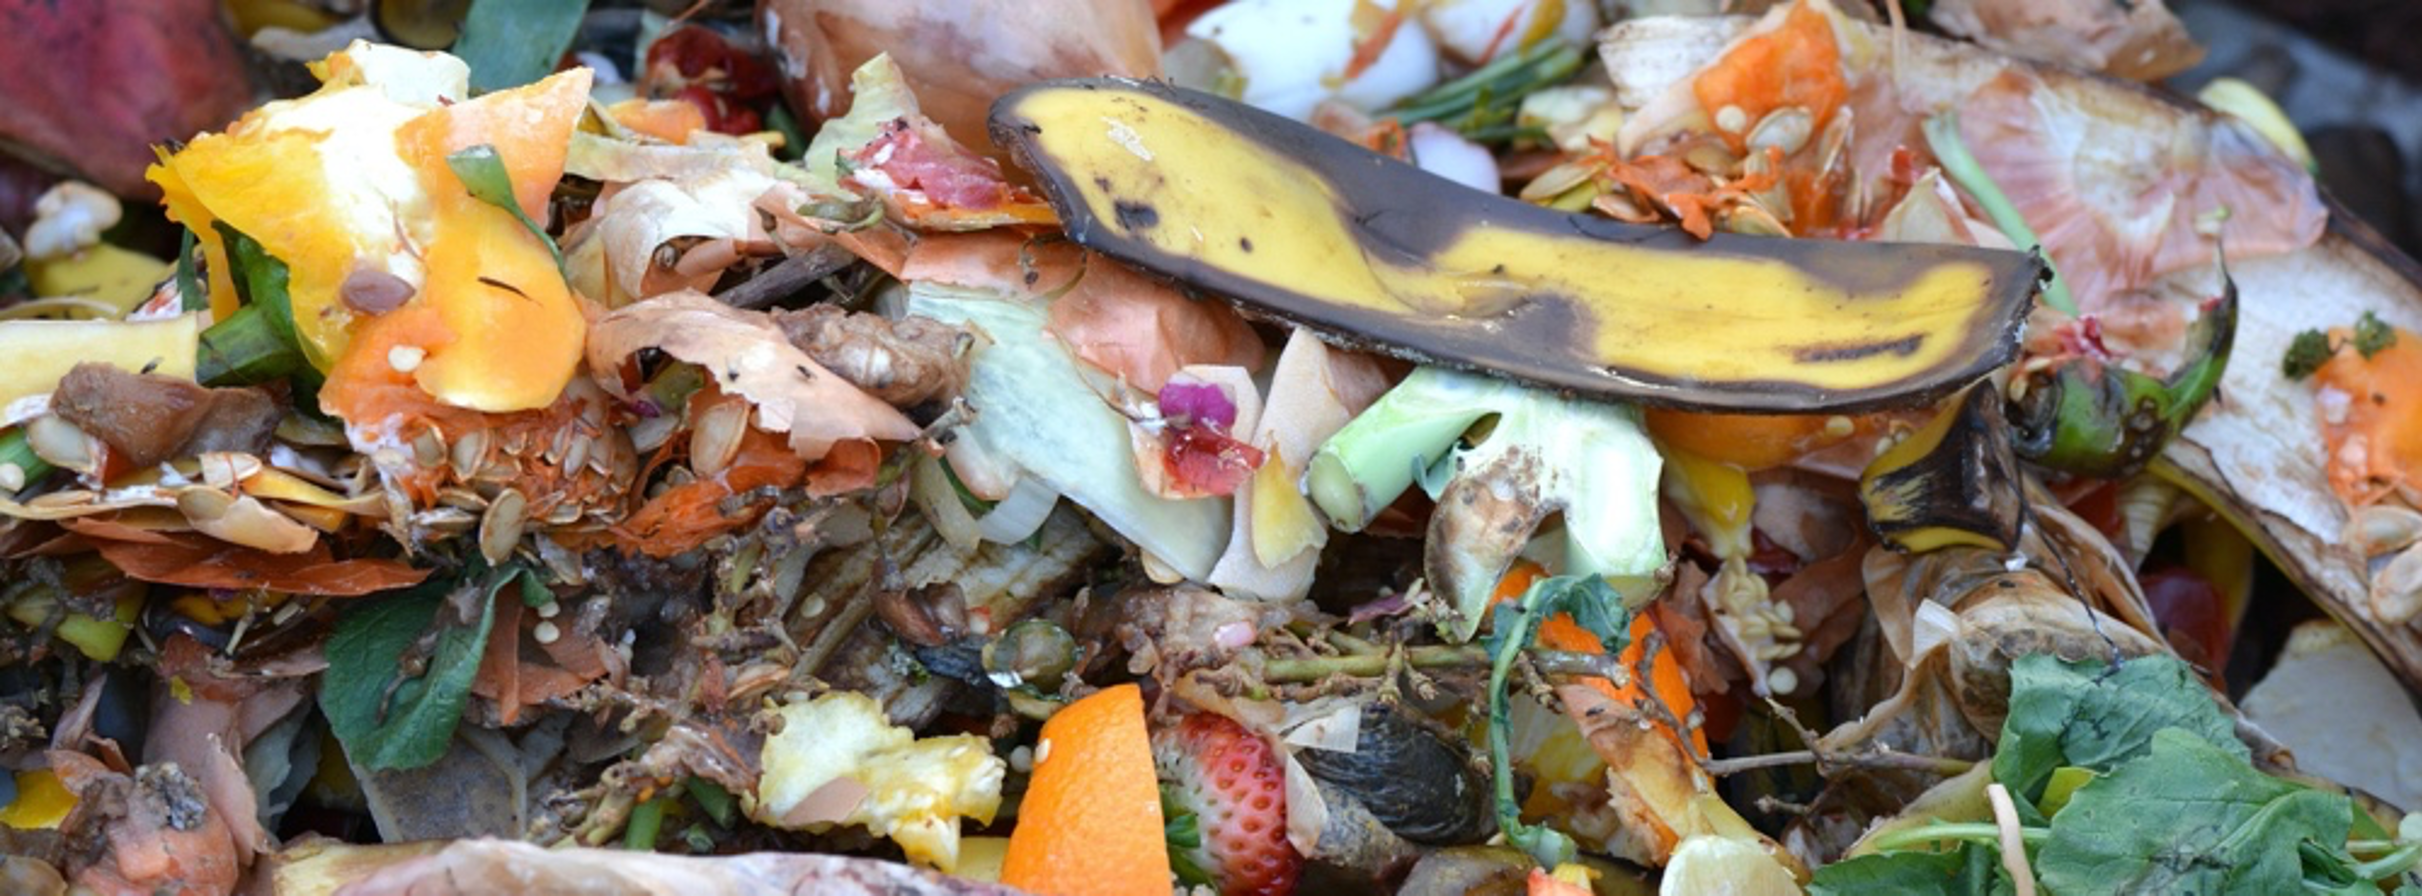 Composting kitchen scraps is good for the garden and the environment. Photo: Ben Kerckx, Pixabay